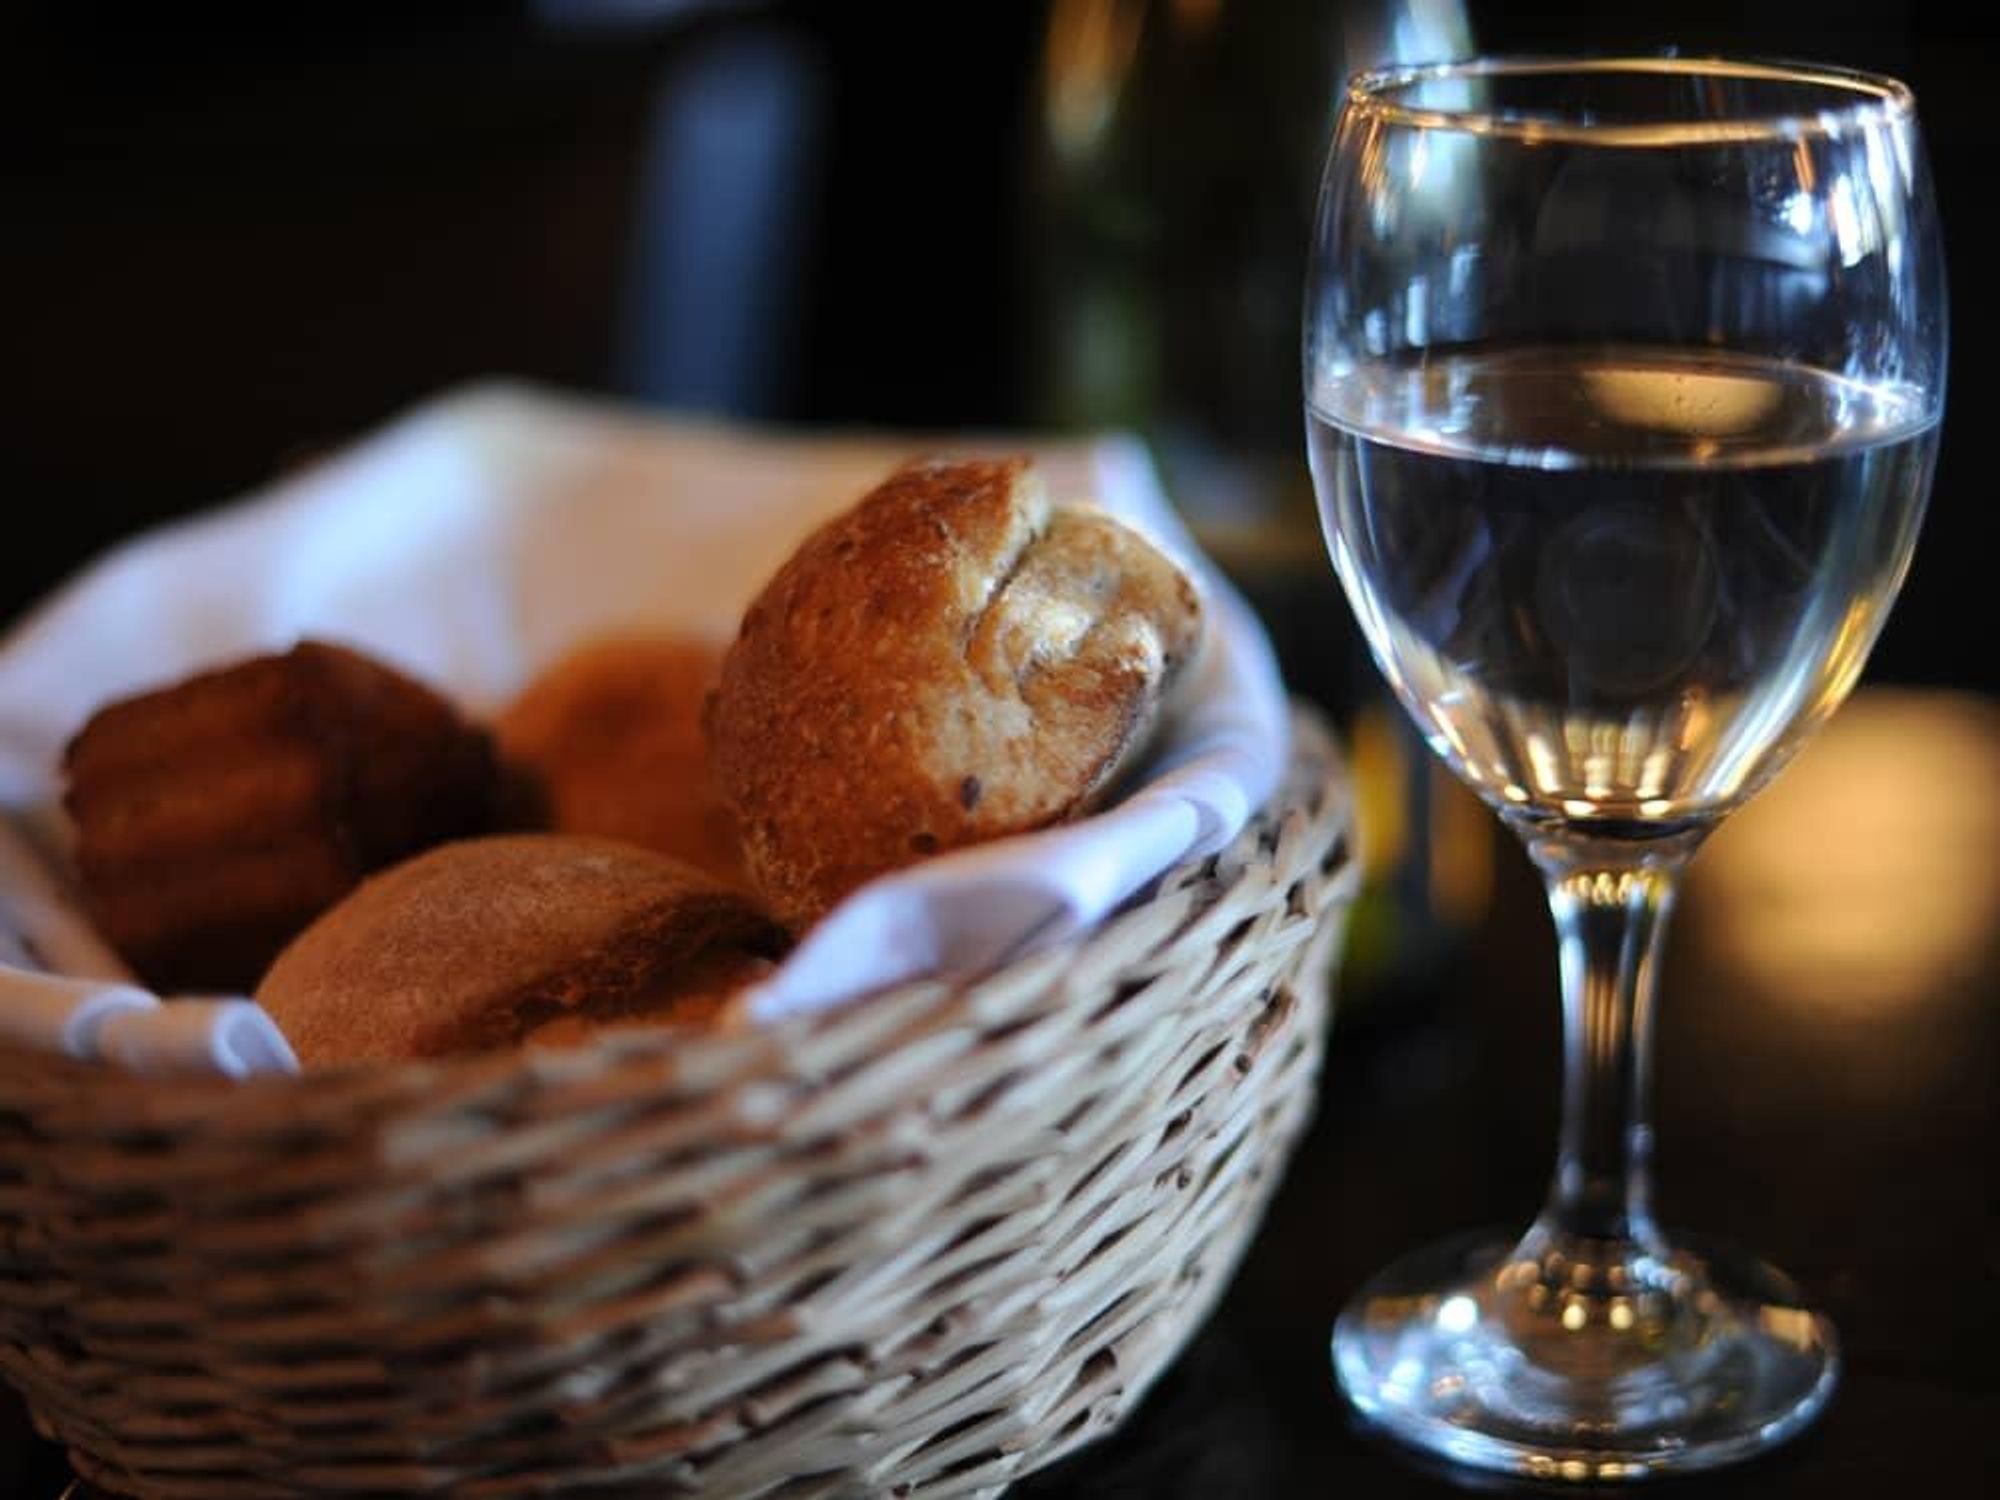 bread in basket and glass of water